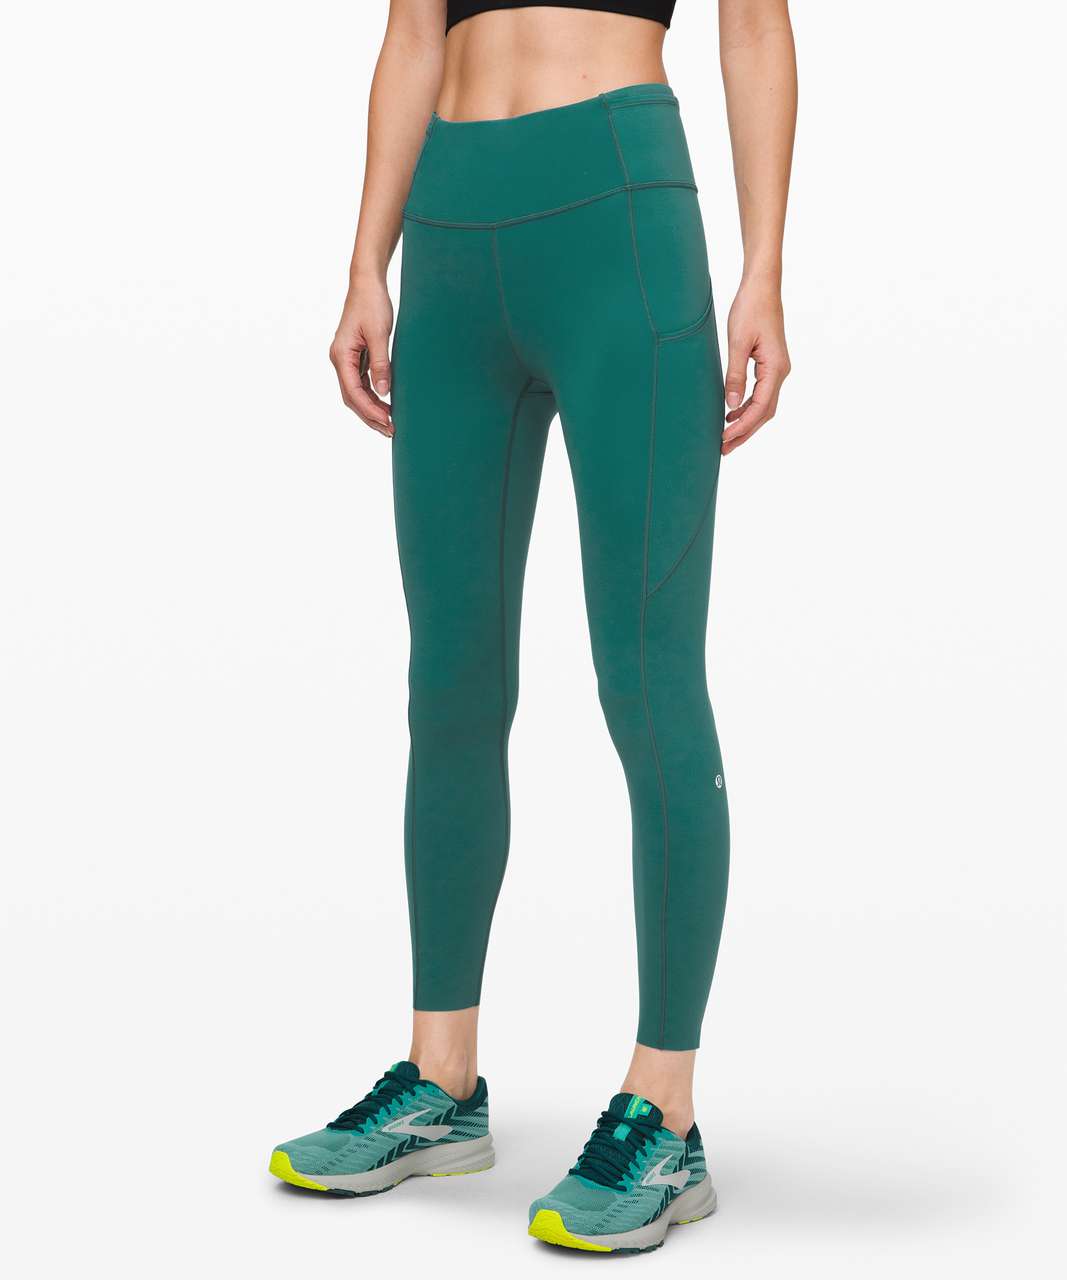 Lululemon Fast and Free Tight II 25" *Non-Reflective Nulux - Laguna